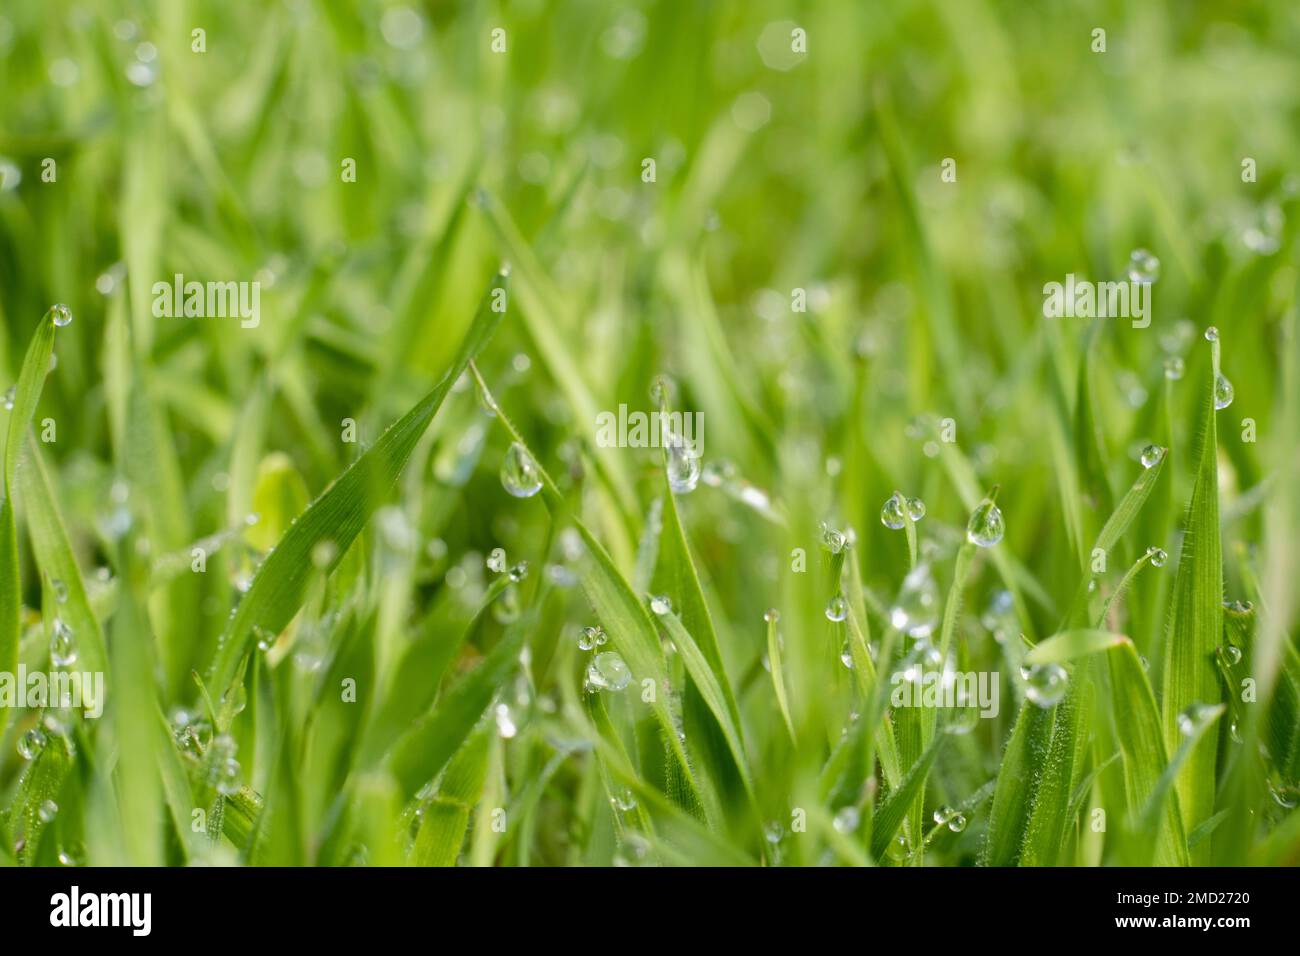 grassy background morning dew nature beauty Stock Photo